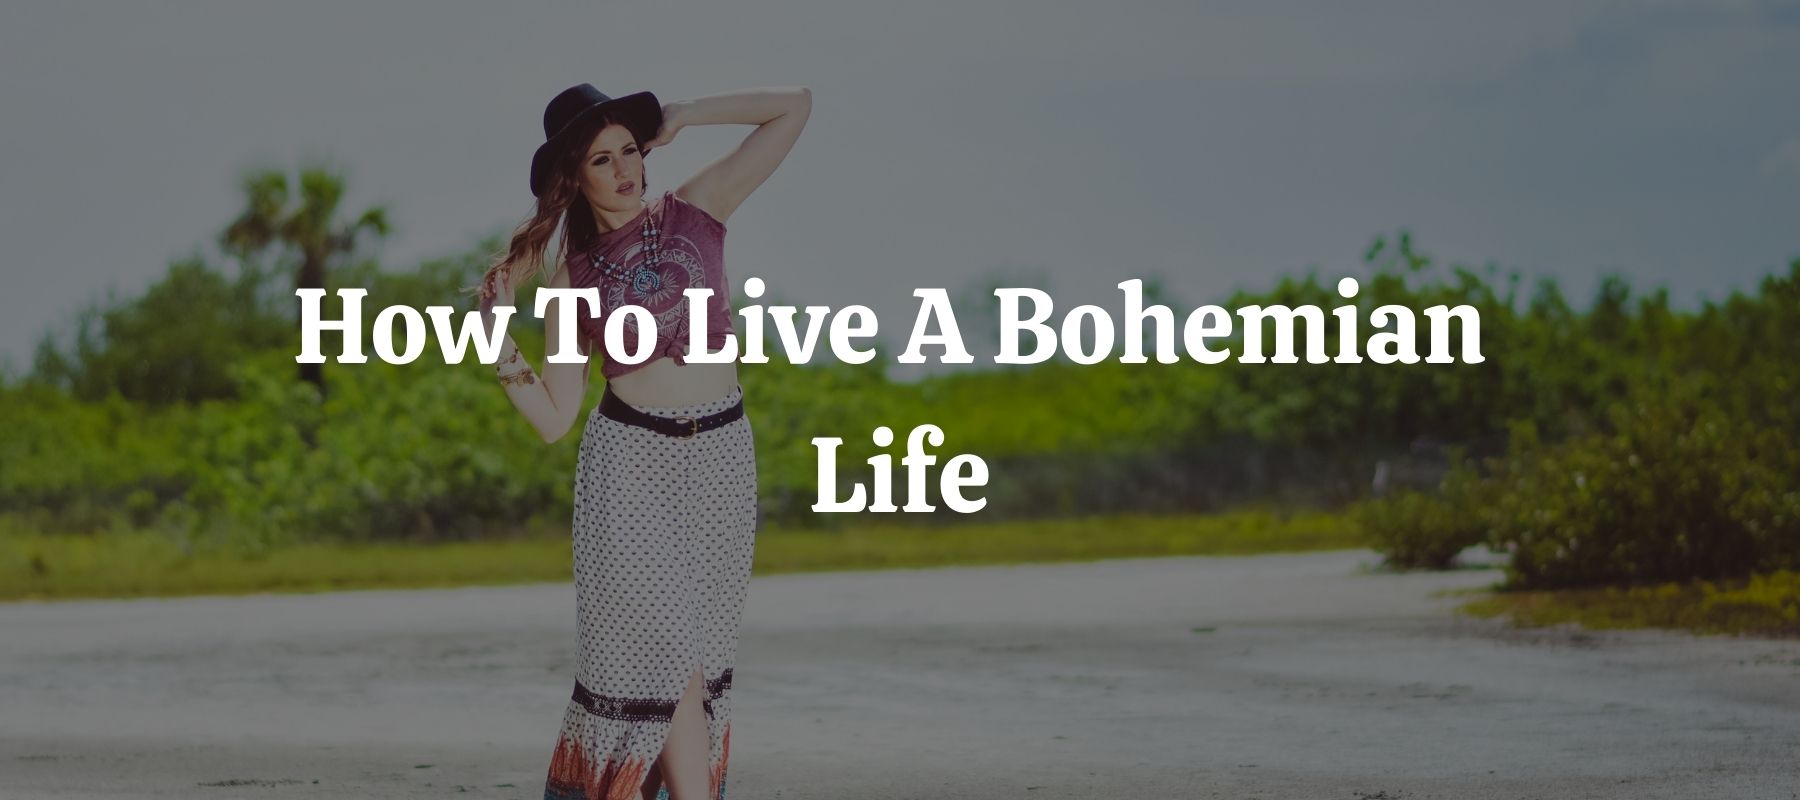 How To Live A Bohemian Life